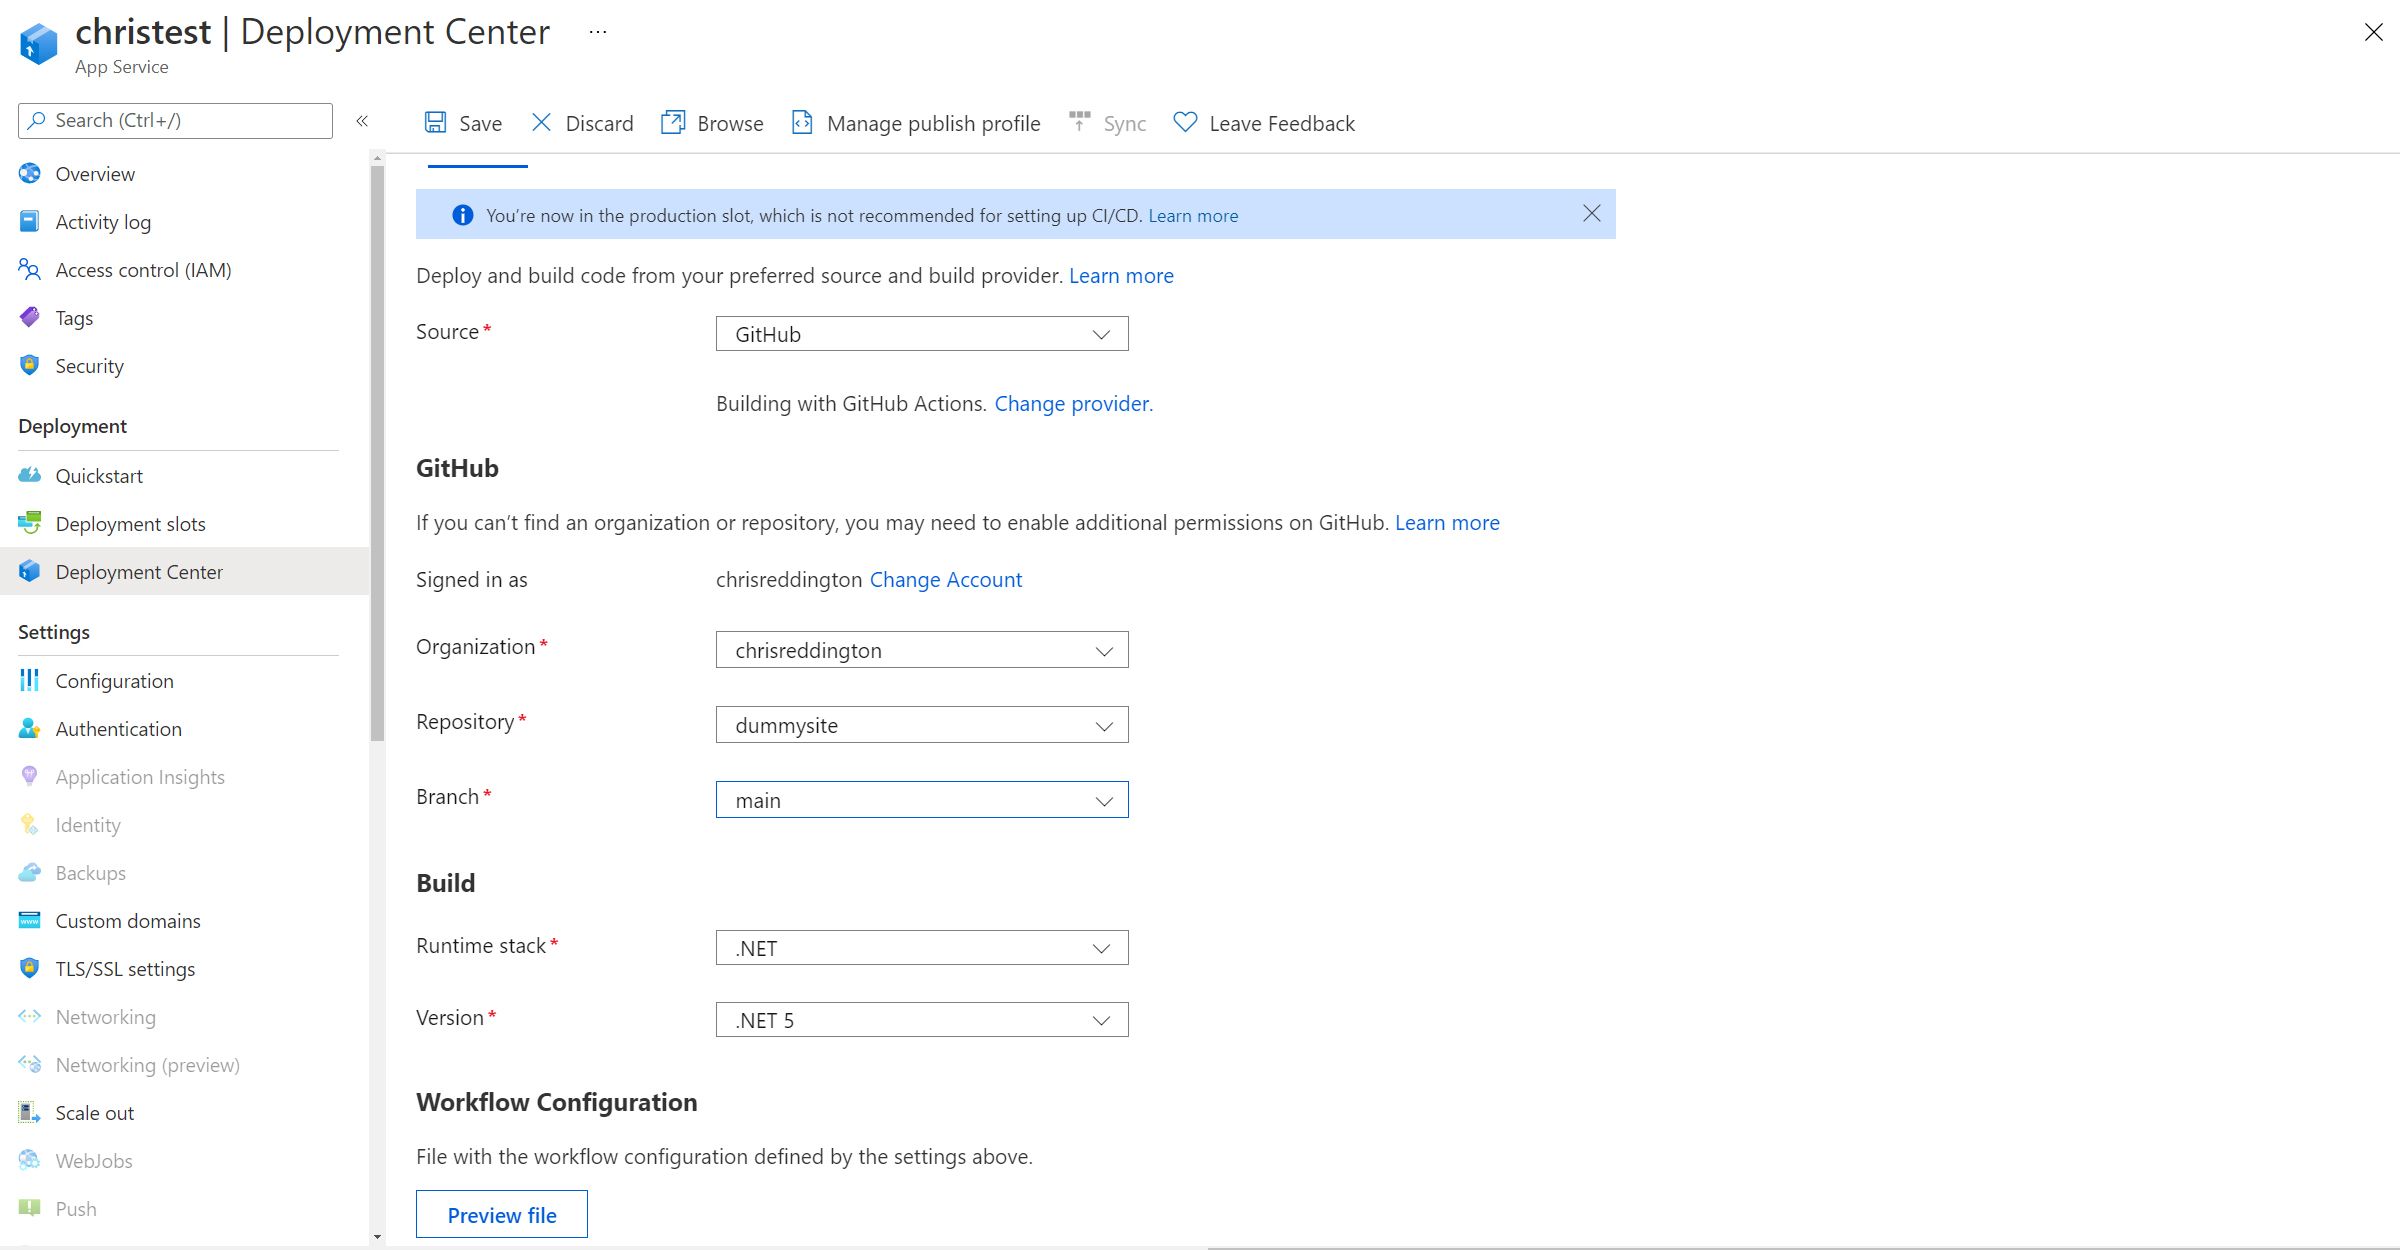 Screenshot showing the Deployment Center Functionality for App Service on Kubernetes through Azure Portal